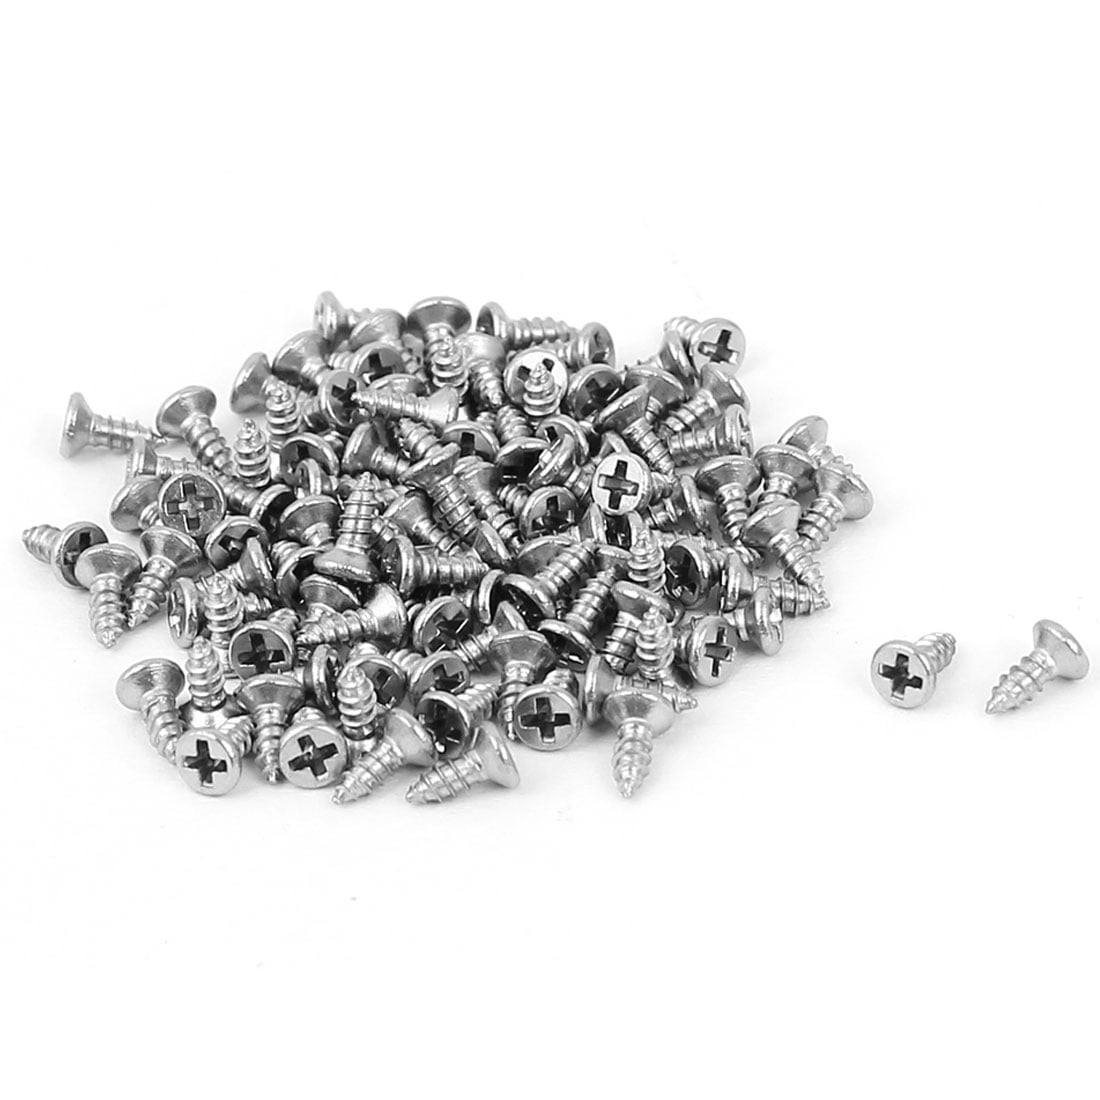 M1.4 x 4mm Self-Tapping Flat Head Phillips Screws 100 Pieces